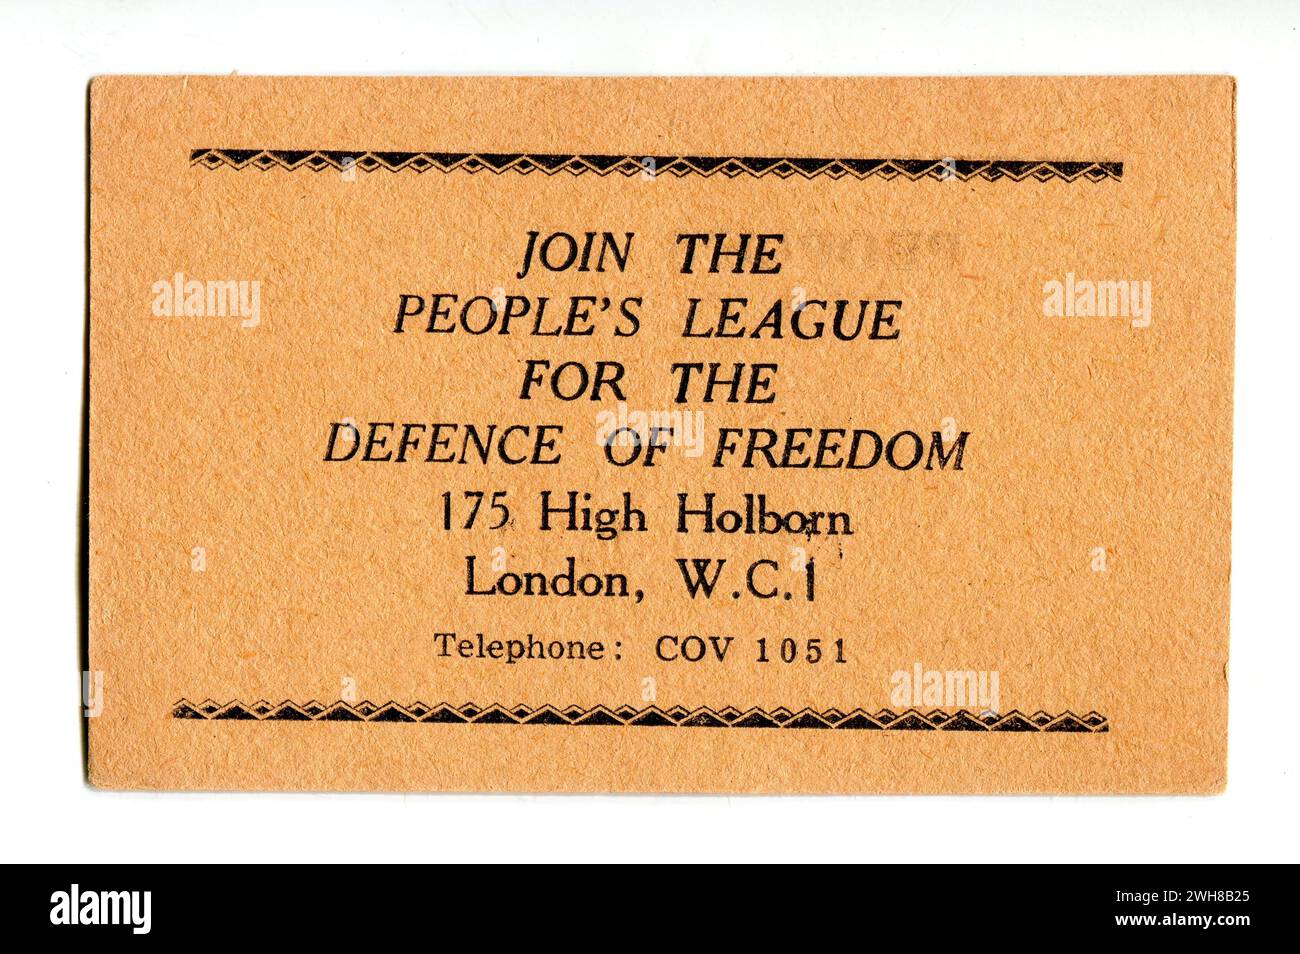 London. 1958 – The reverse of a special ticket produced for a single journey on the People’s League Freedom Bus. During the London Bus strike, which lasted from 5 May to 20 June 1958, a right-wing organisation known as ‘The People's League for the Defence of Freedom’ obtained permission to operate a limited bus service on 22 routes around London. The reverse of the ticket invites the holder to join the organisation, whose head office was located at 175 High Holborn, London, W.C.1. Stock Photo